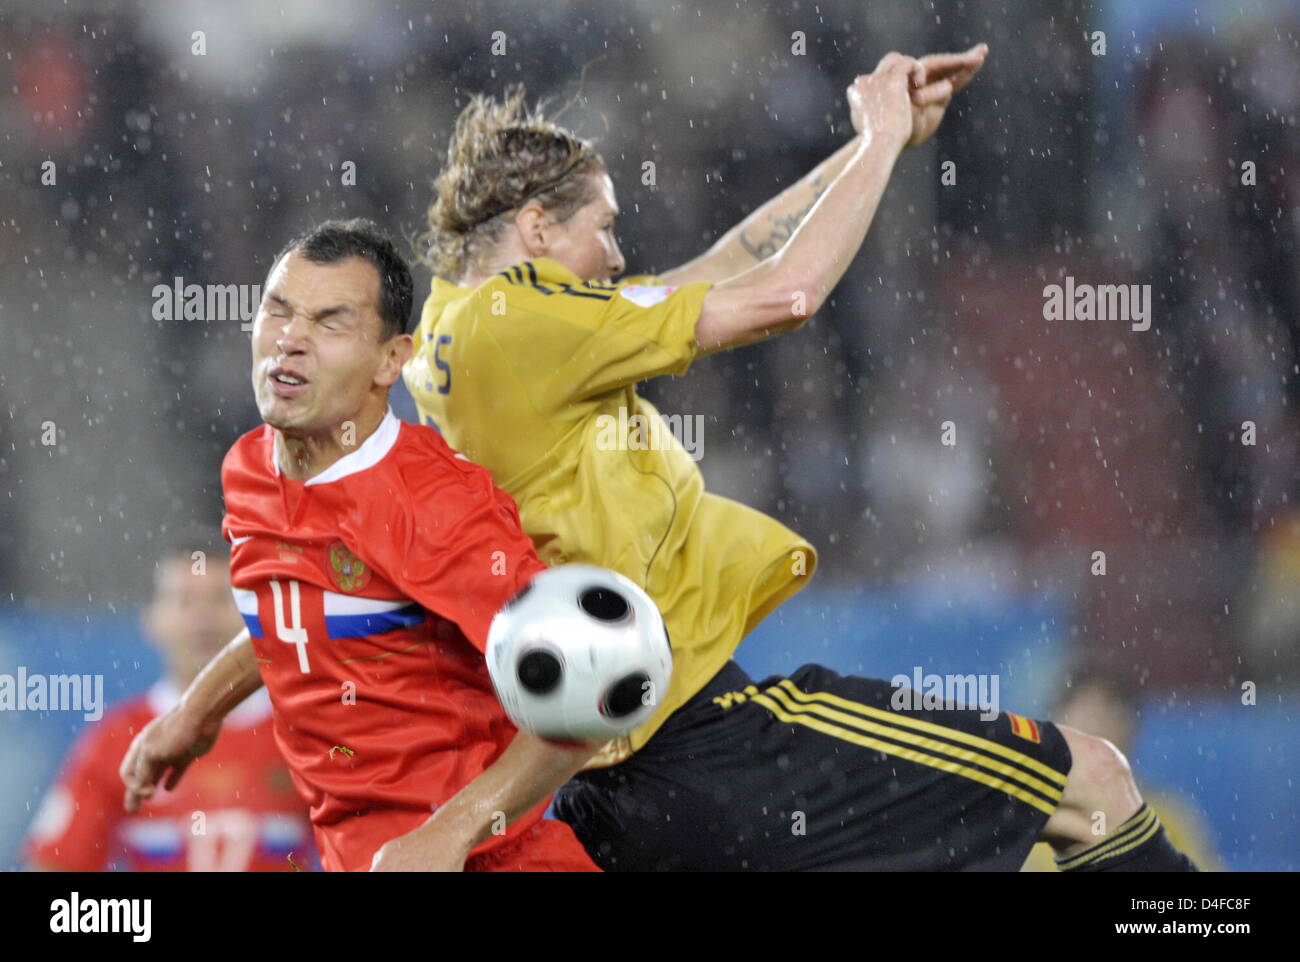 Sergei Ignashevich of Russia vies with Fernando Torres (R) of Spain during the UEFA EURO 2008 semifinal match between Russia and Spain at the Ernst Happel stadium in Vienna, Austria, 26 June 2008. Photo: Achim Scheidemann dpa +please note UEFA restrictions particulary in regard to slide shows and 'No Mobile Services'+ +++(c) dpa - Bildfunk+++ Stock Photo